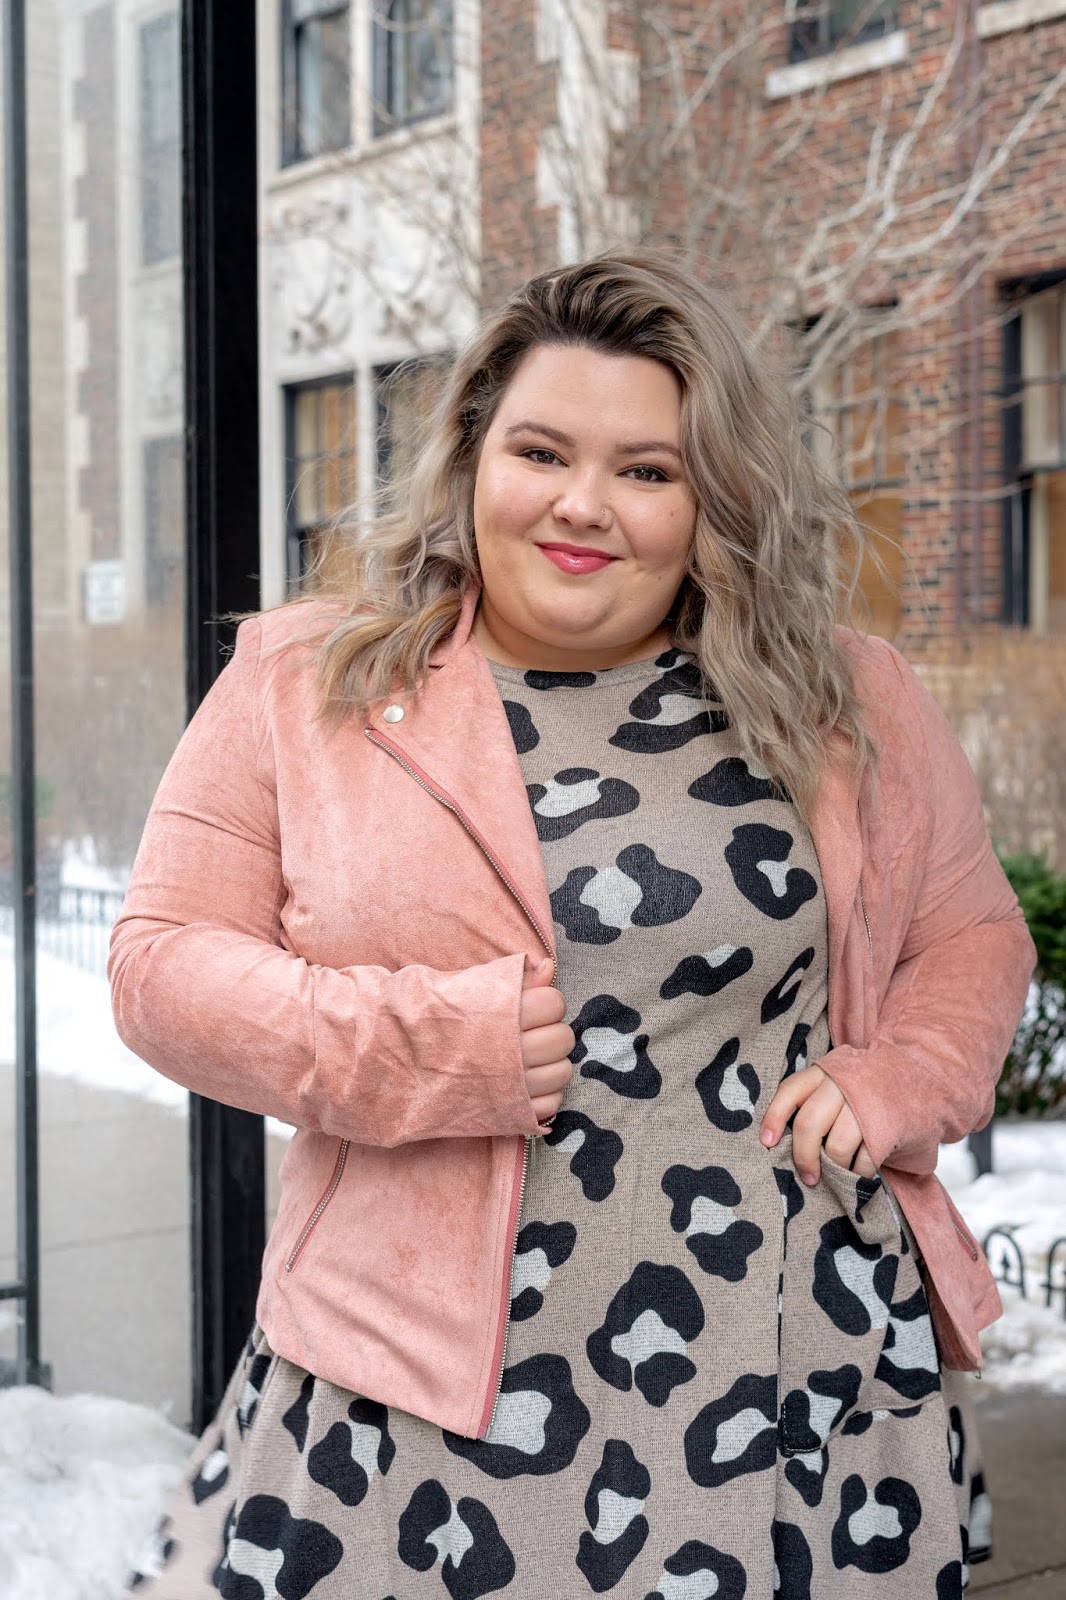 Chicago Plus Size Petite Fashion Blogger, YouTuber, and model Natalie Craig, of Natalie in the City, reviews Chic Soul